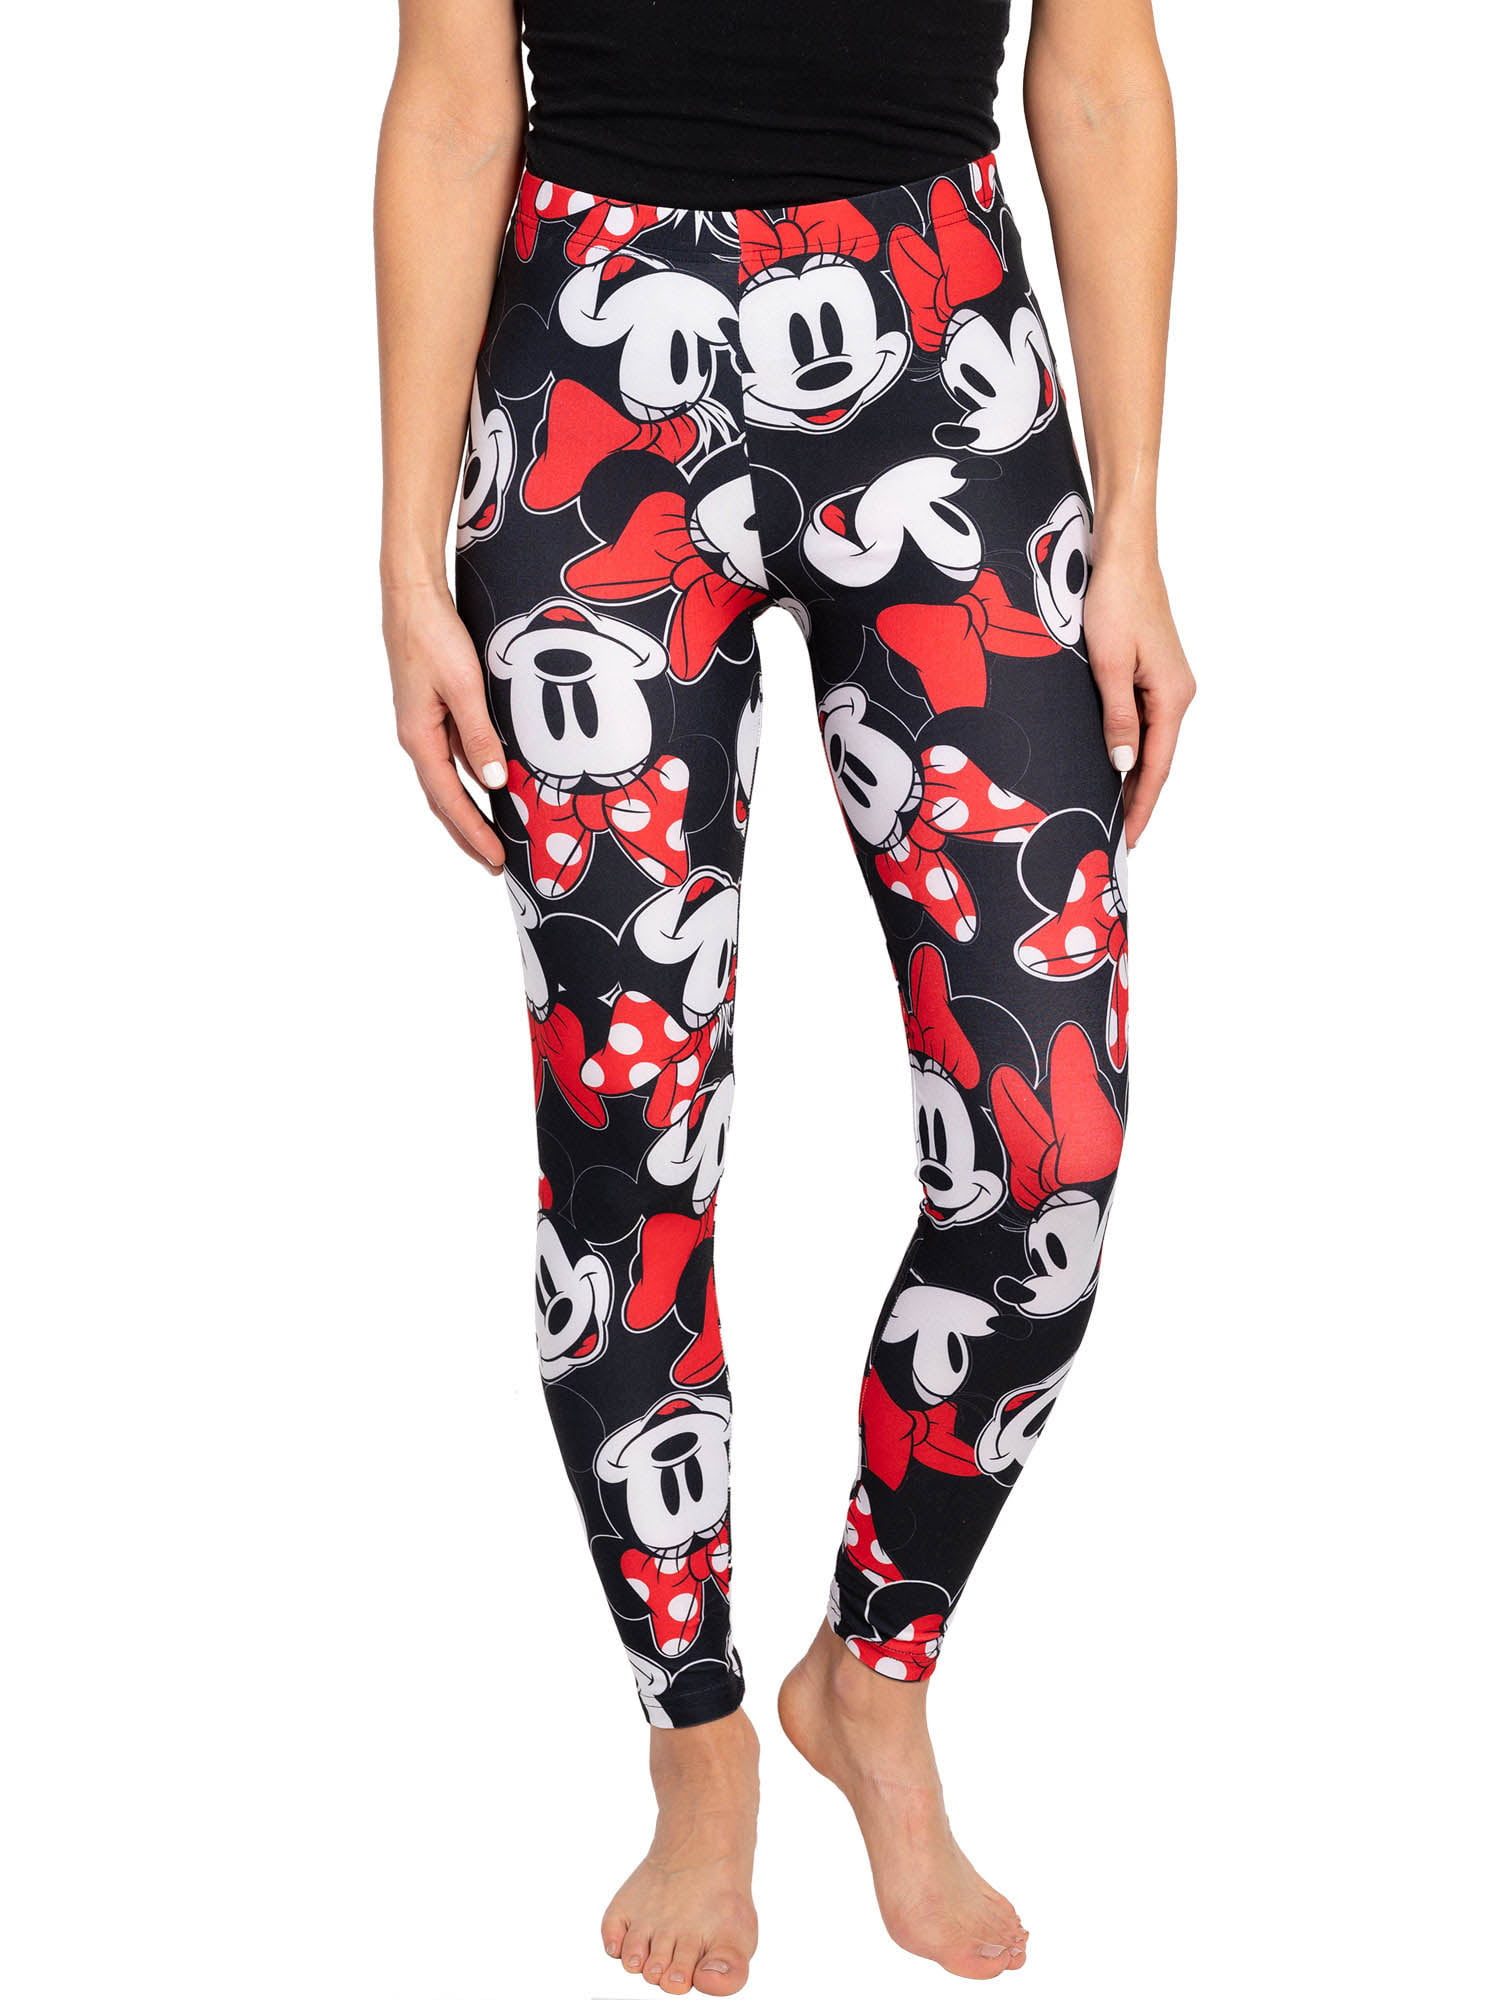 Juniors Disney Minnie Mouse Red Bow Black Leggings All-Over Print